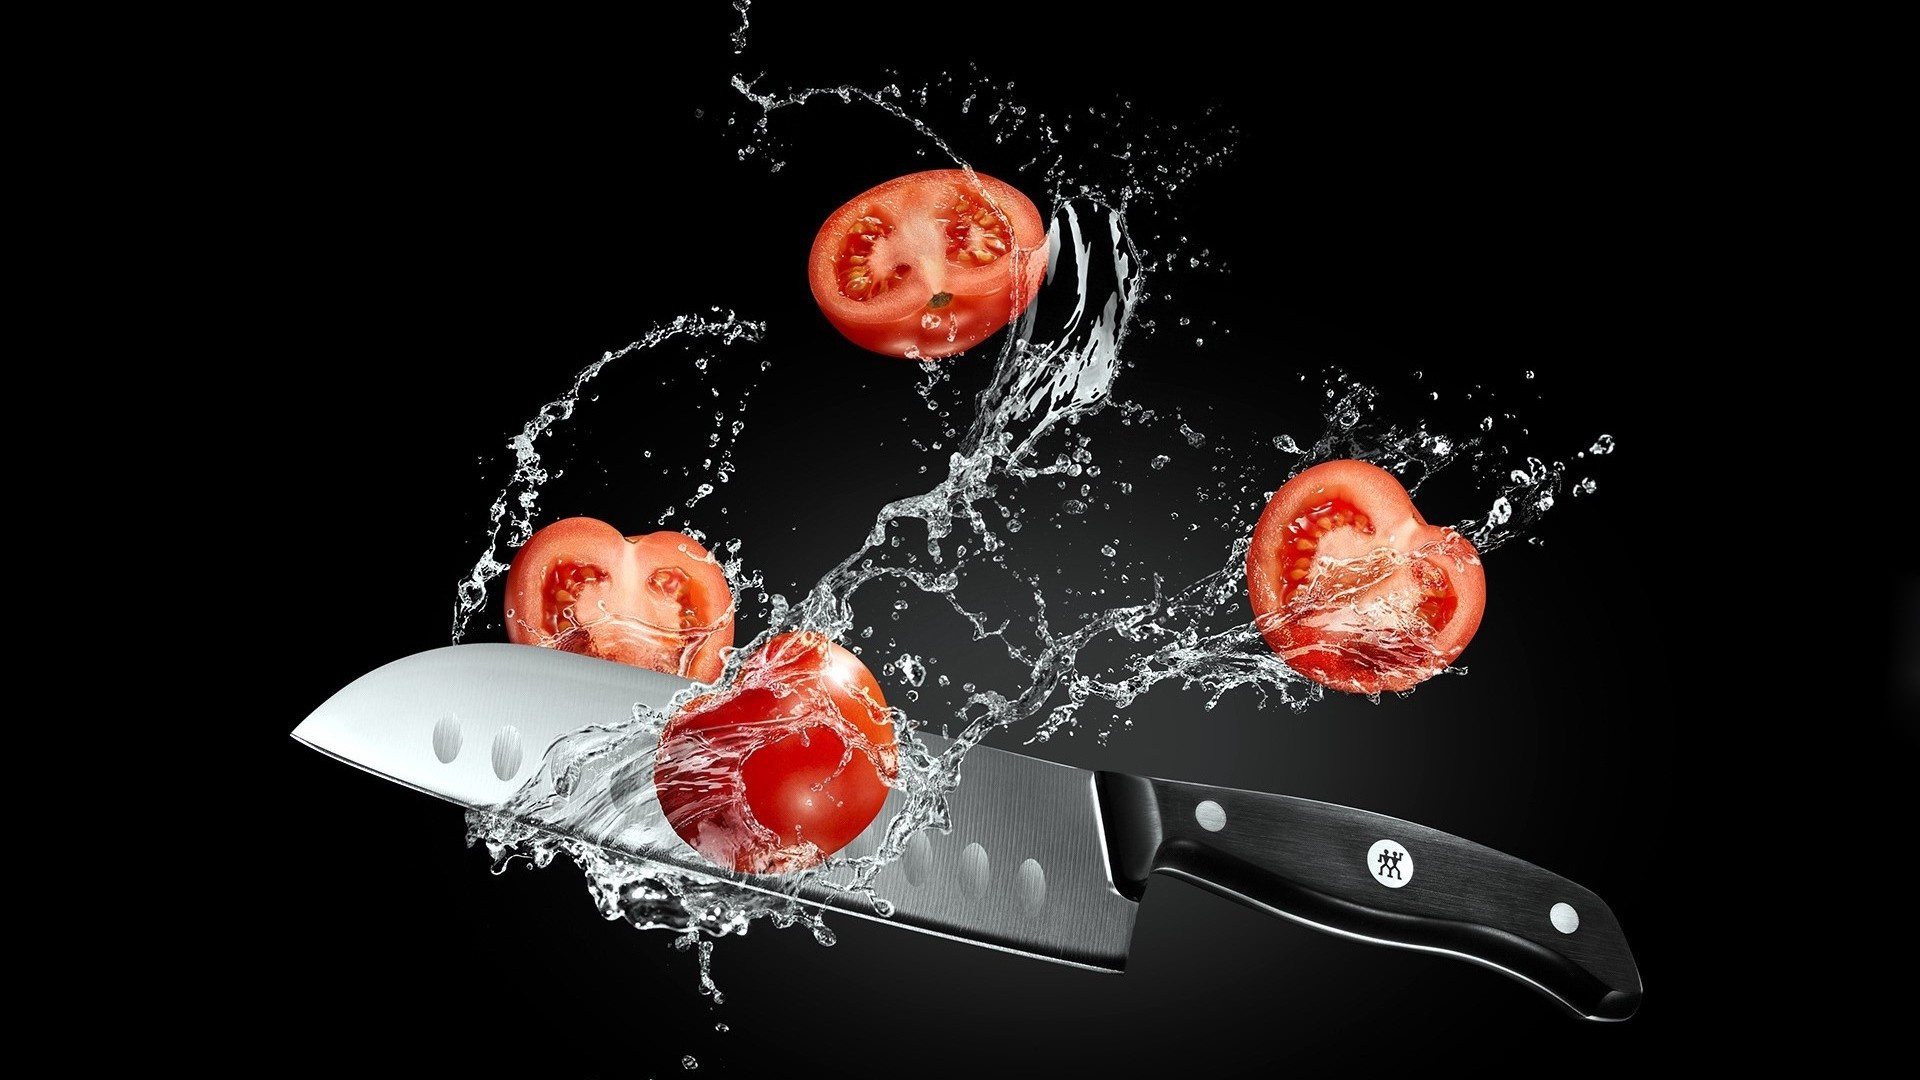 Knife and tomato wallpapers, Widescreen backgrounds, Culinary art, Digital design, 1920x1080 Full HD Desktop